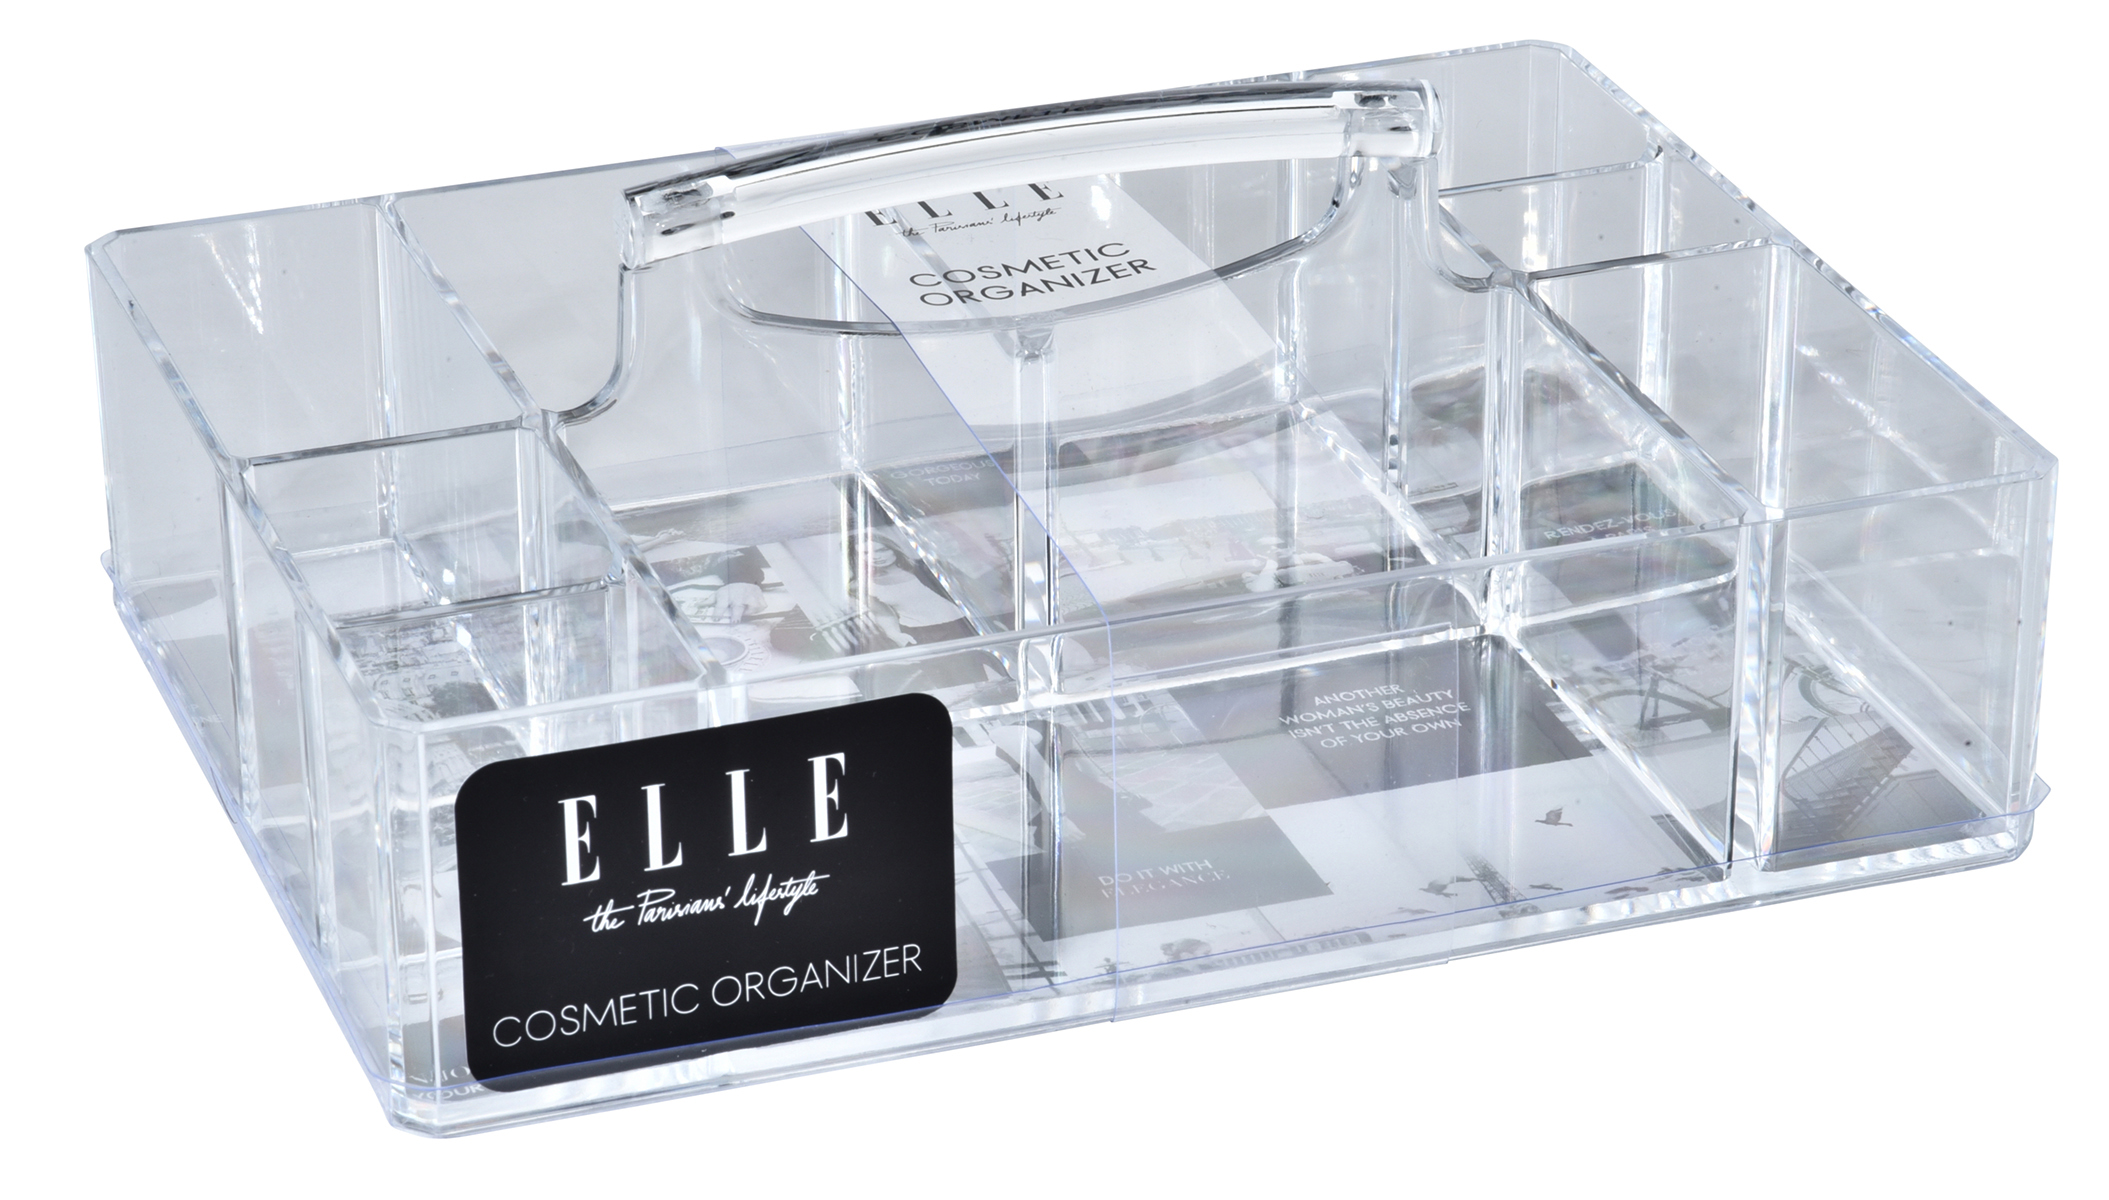 ELLE The Parisians Lifestyle Collection COSMETIC Makeup Organizers w/ Carrying Handle